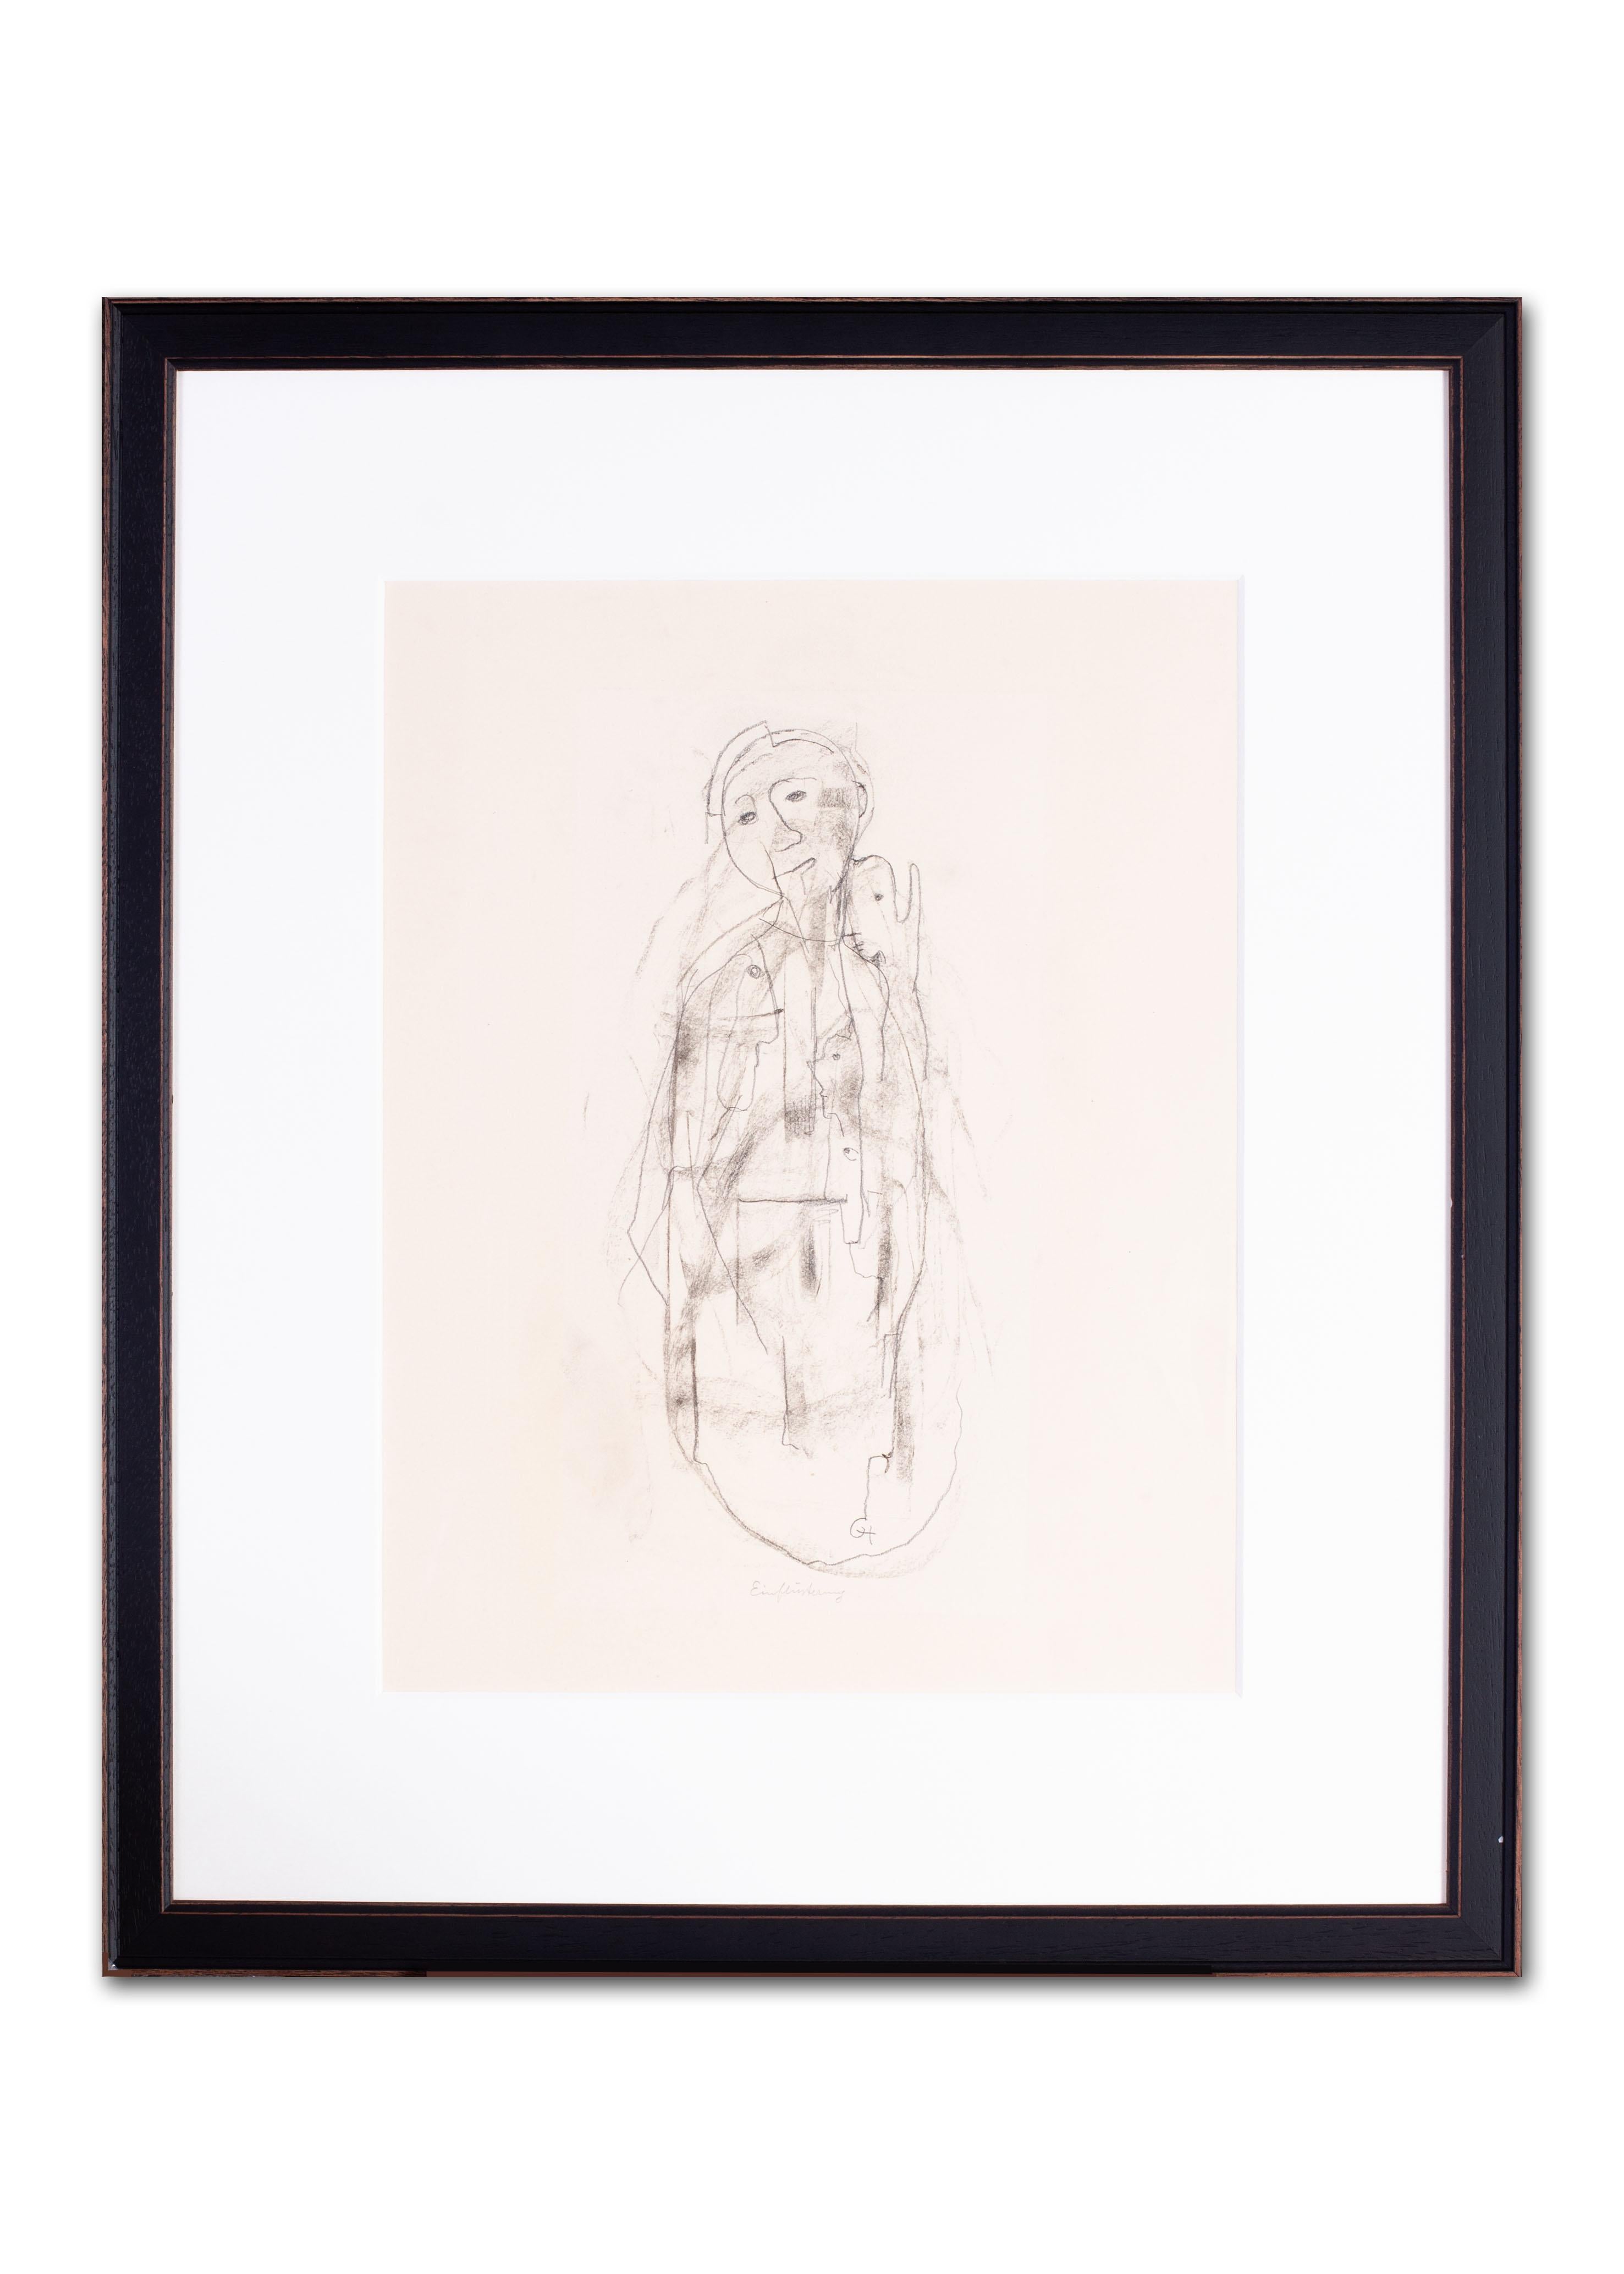 German expressionist drawing by Carl Hofer' Whispering' For Sale 1